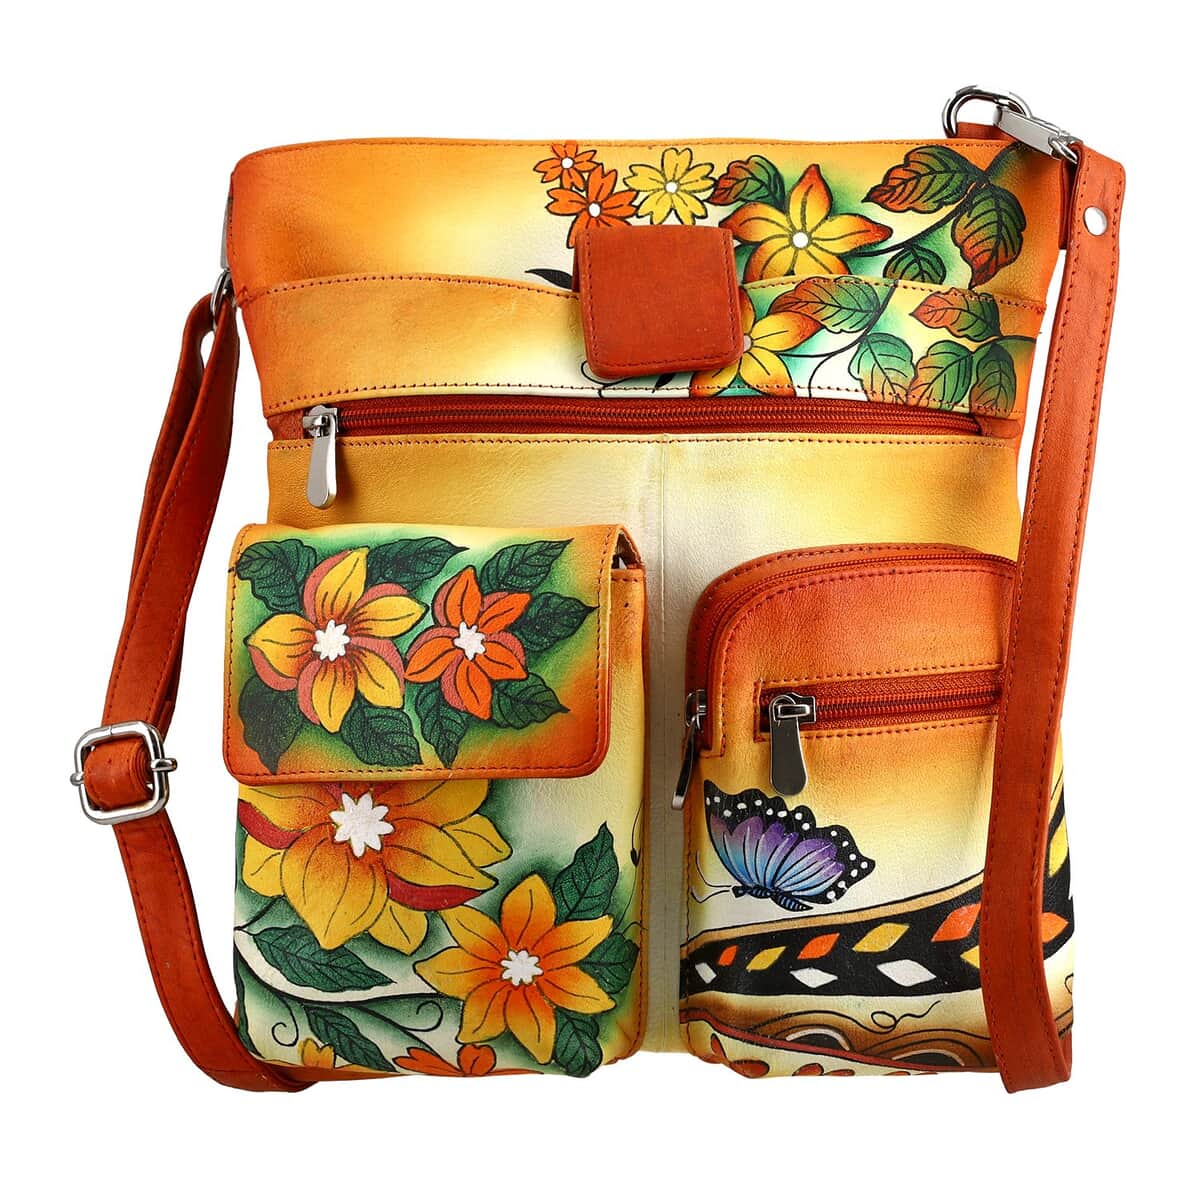 "SUKRITI Super Organized Floral Butterfly Hand Painted Genuine Leather Crossbody Bag Size: 10.5(L)x12(W) inches Color: Orange" image number 0